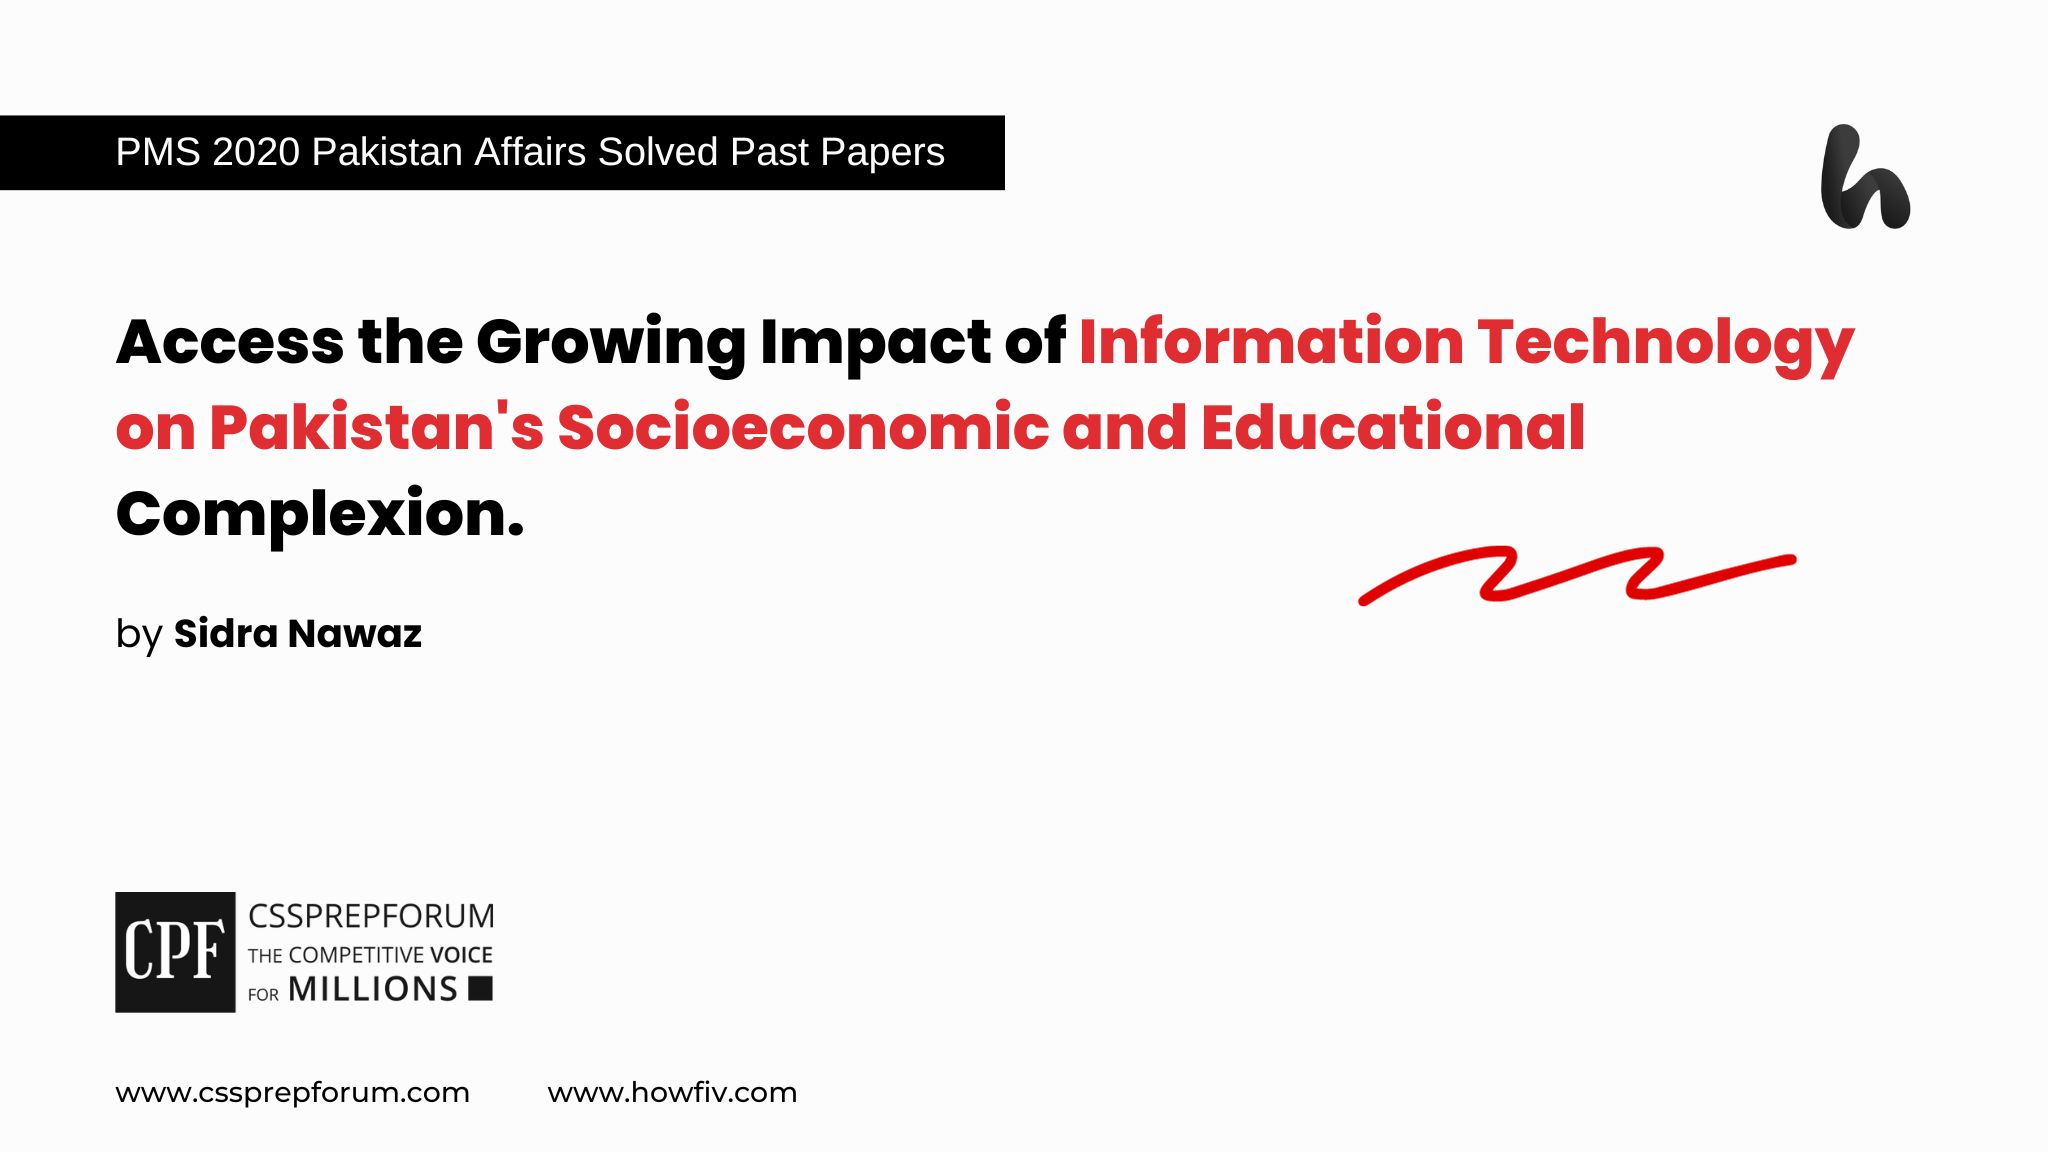 Access the Growing Impact of Information Technology on Pakistan's Socioeconomic and Educational Complexion.